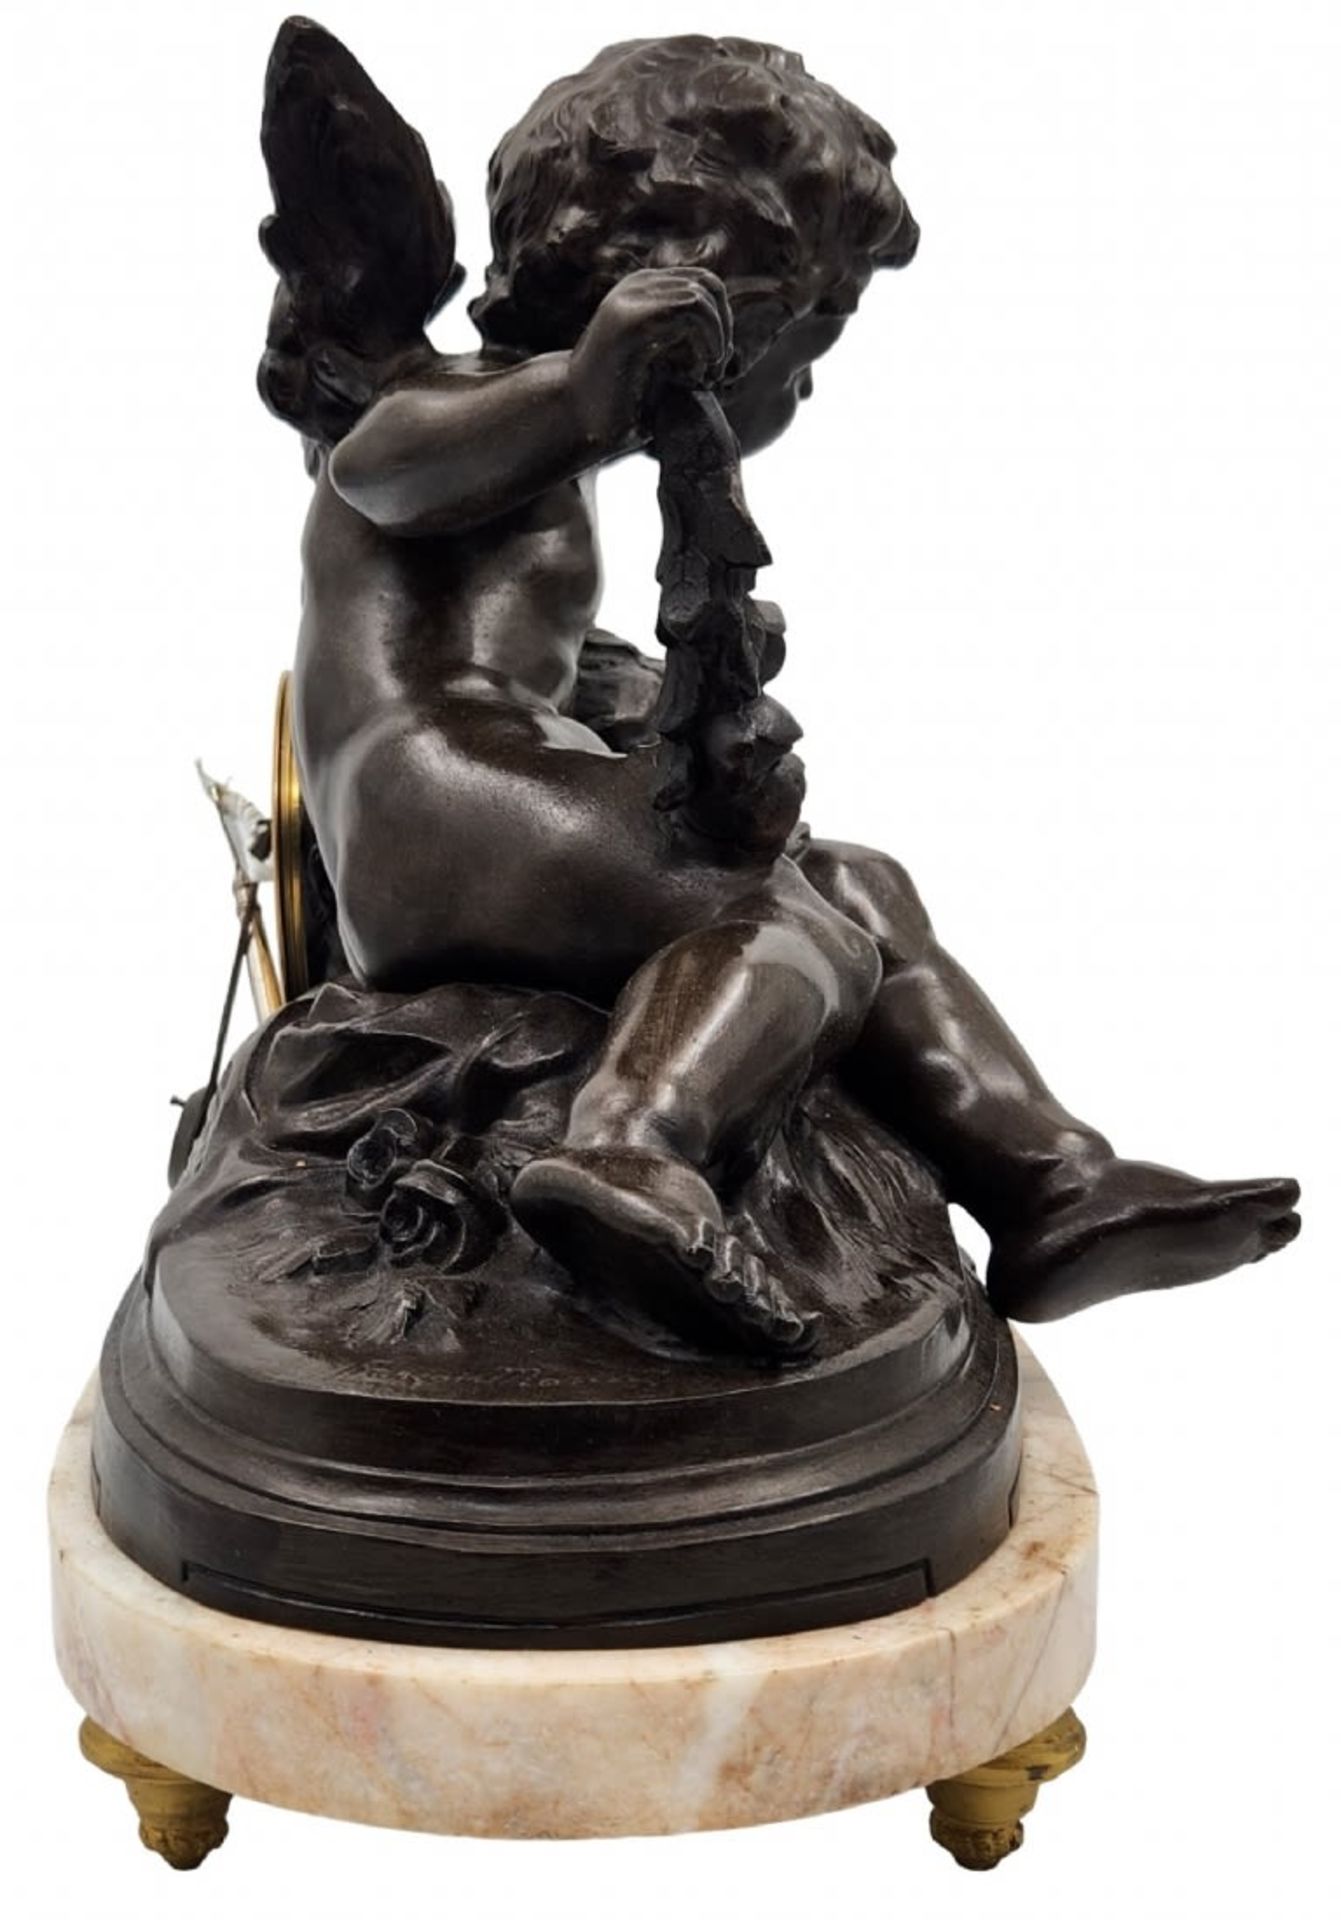 Antique French mantel clock, based on Hippolyte Francois Moreau work (French sculptor who lived - Image 9 of 14